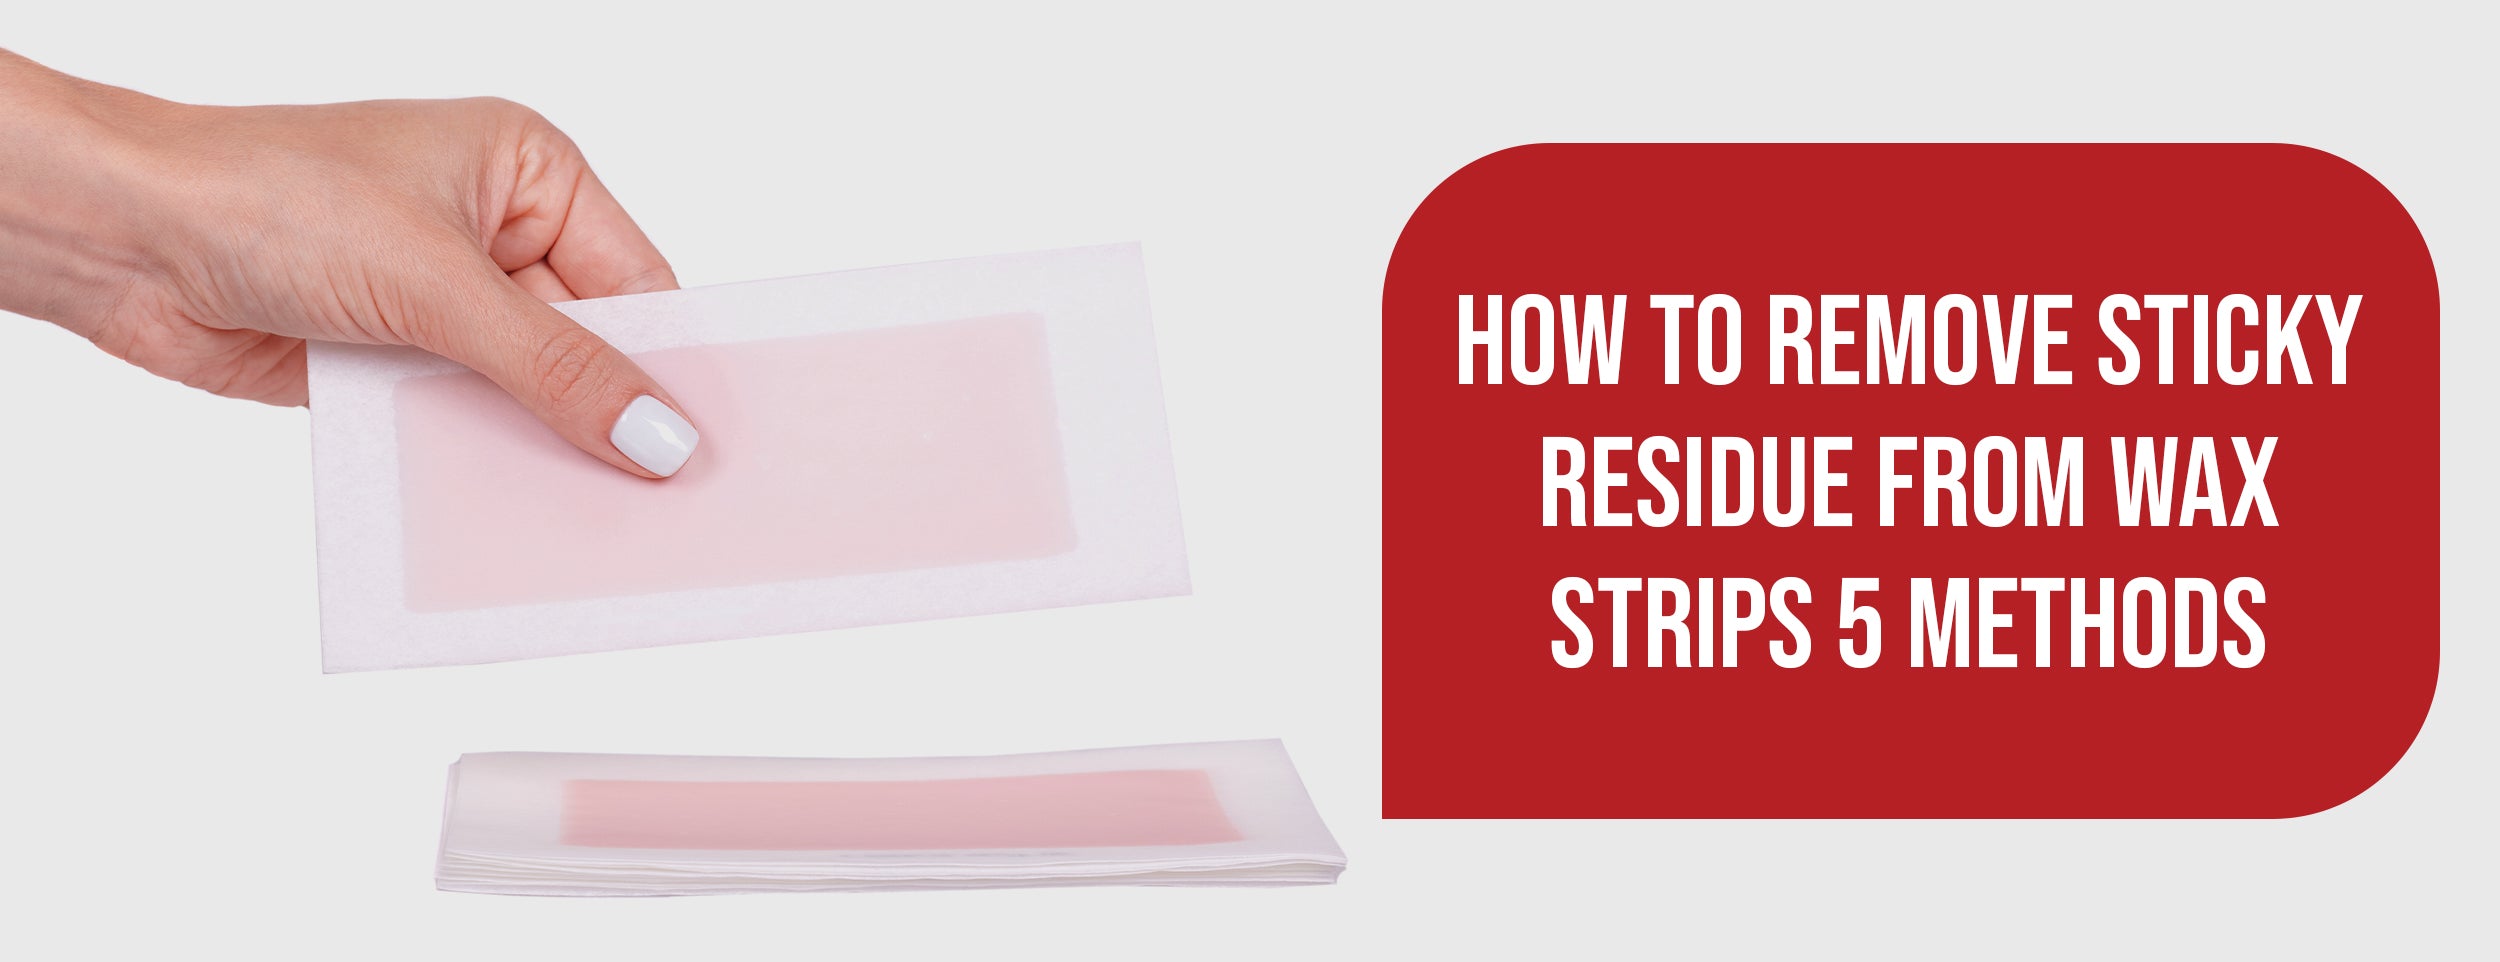 5 Methods To Remove Sticky Residue From Wax Strips